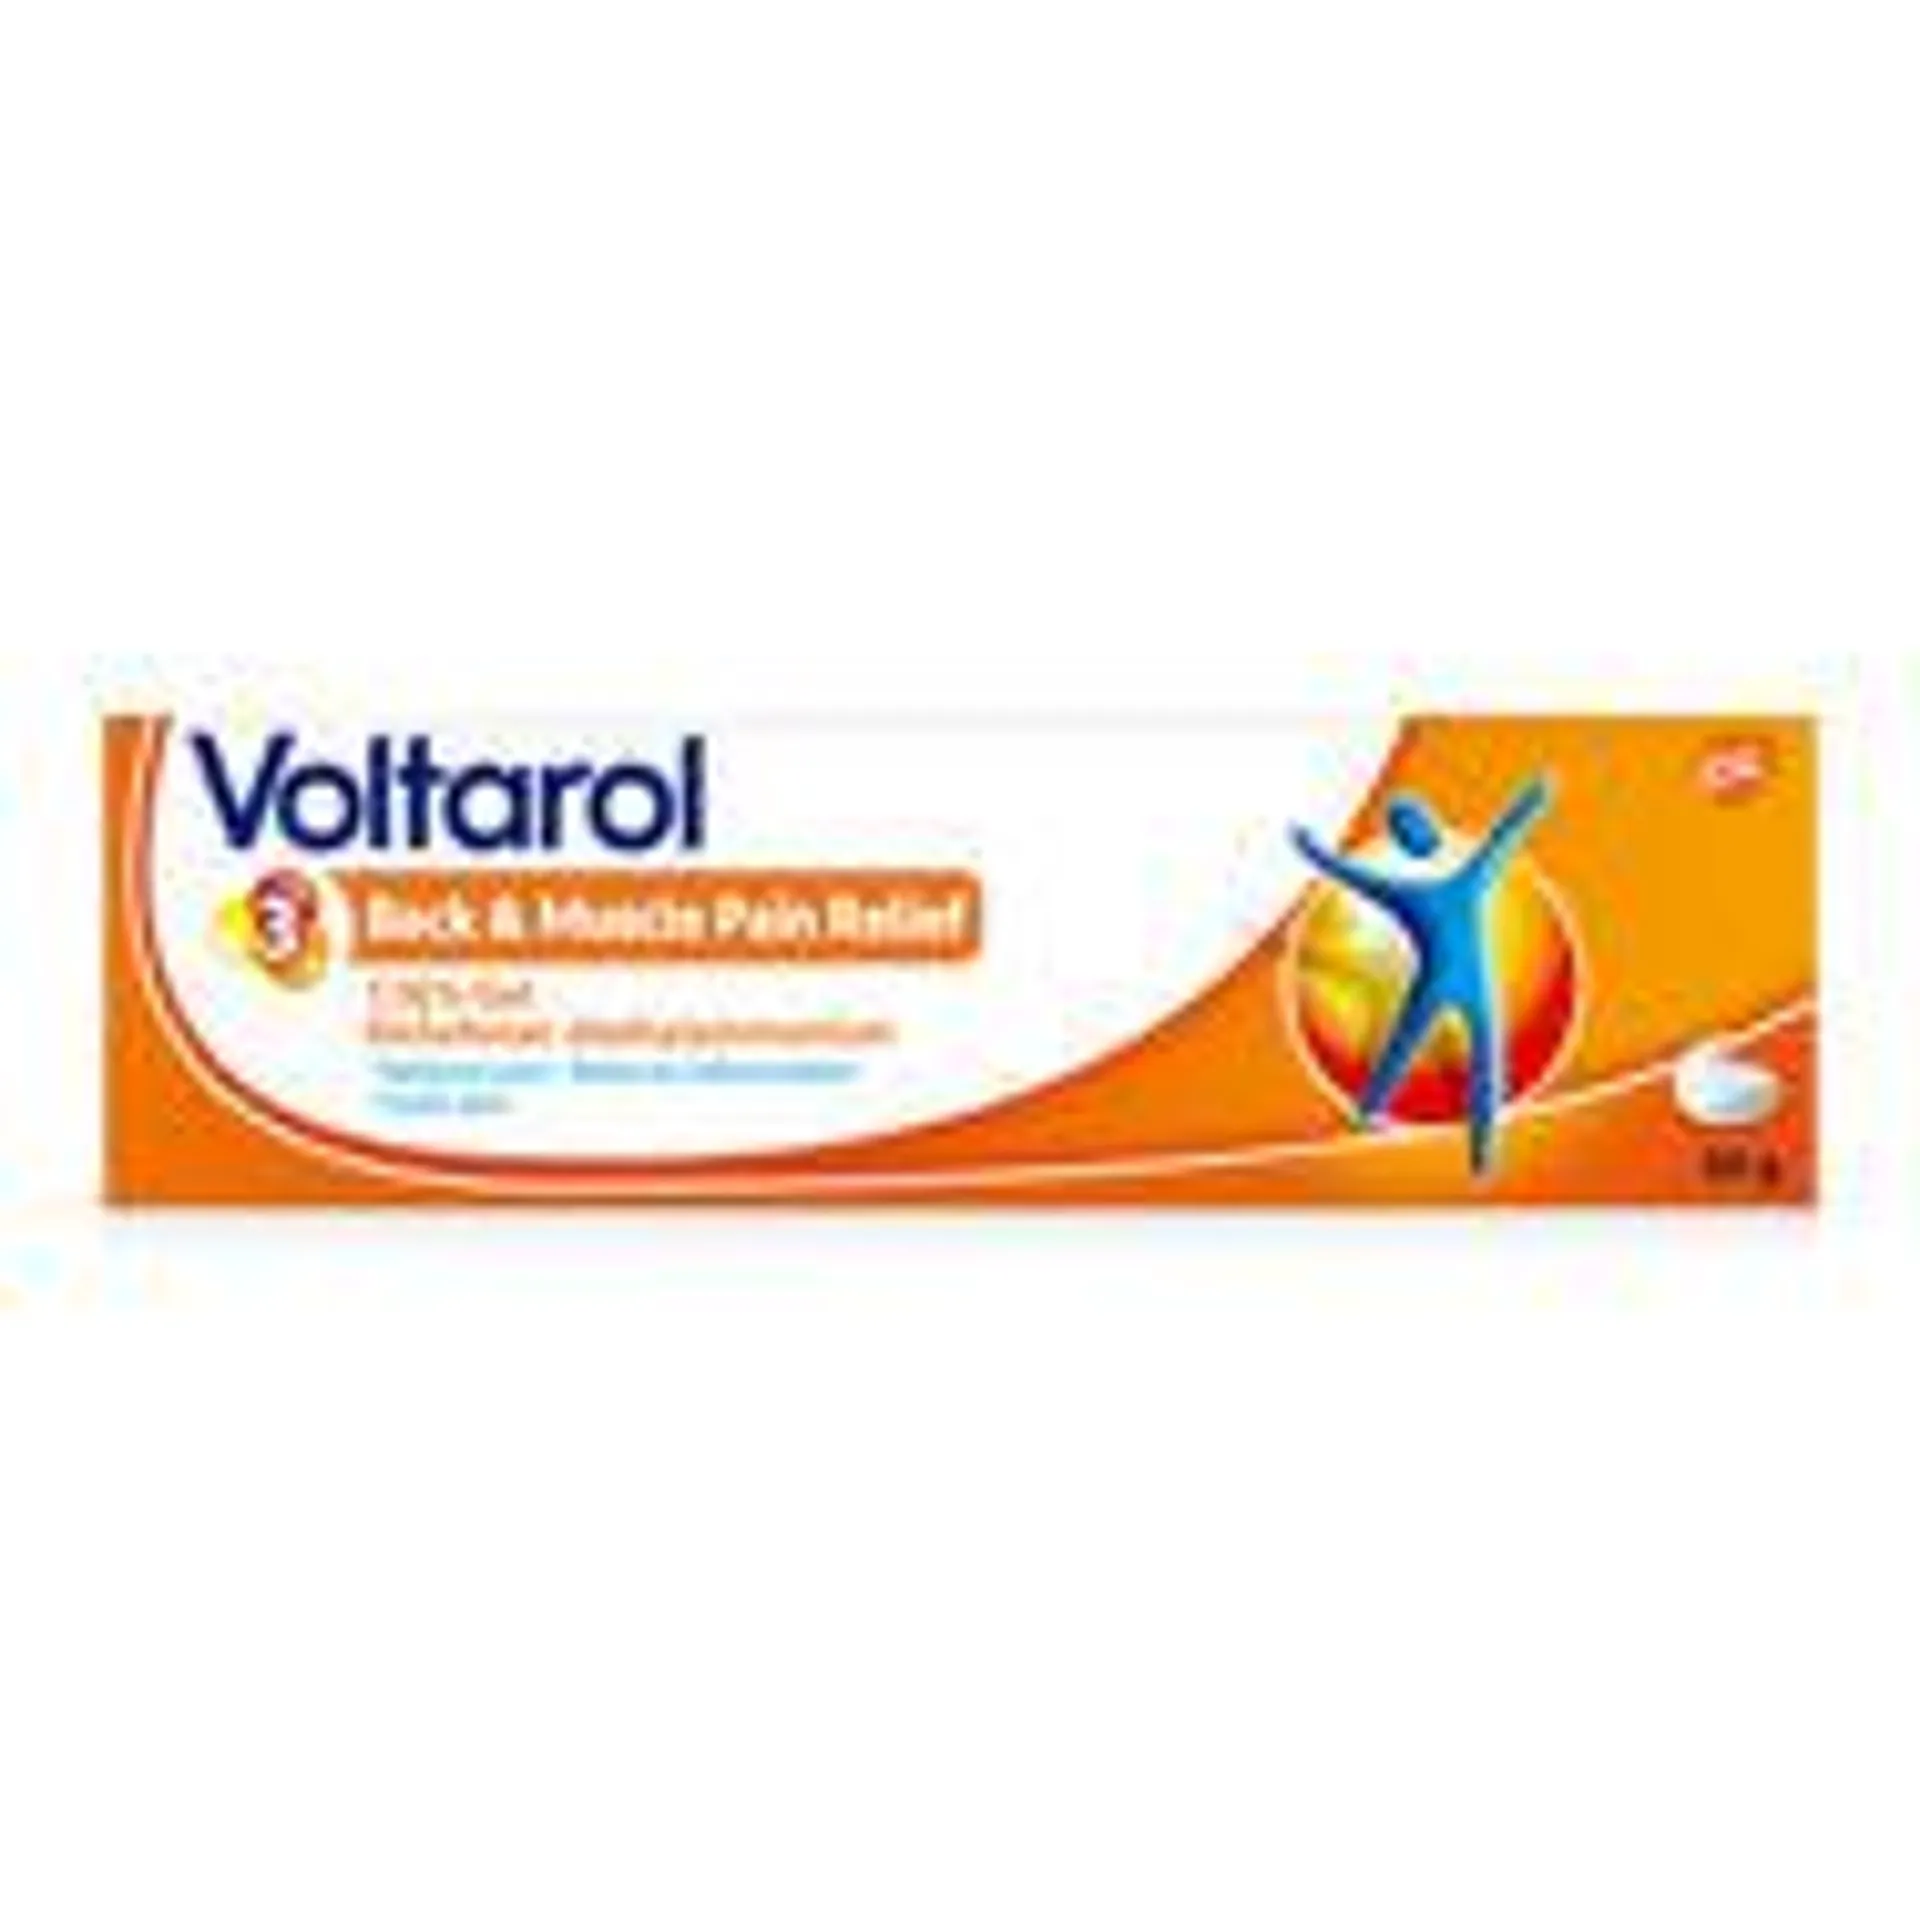 Voltarol Back and Muscle Pain Relief 1.16% Gel